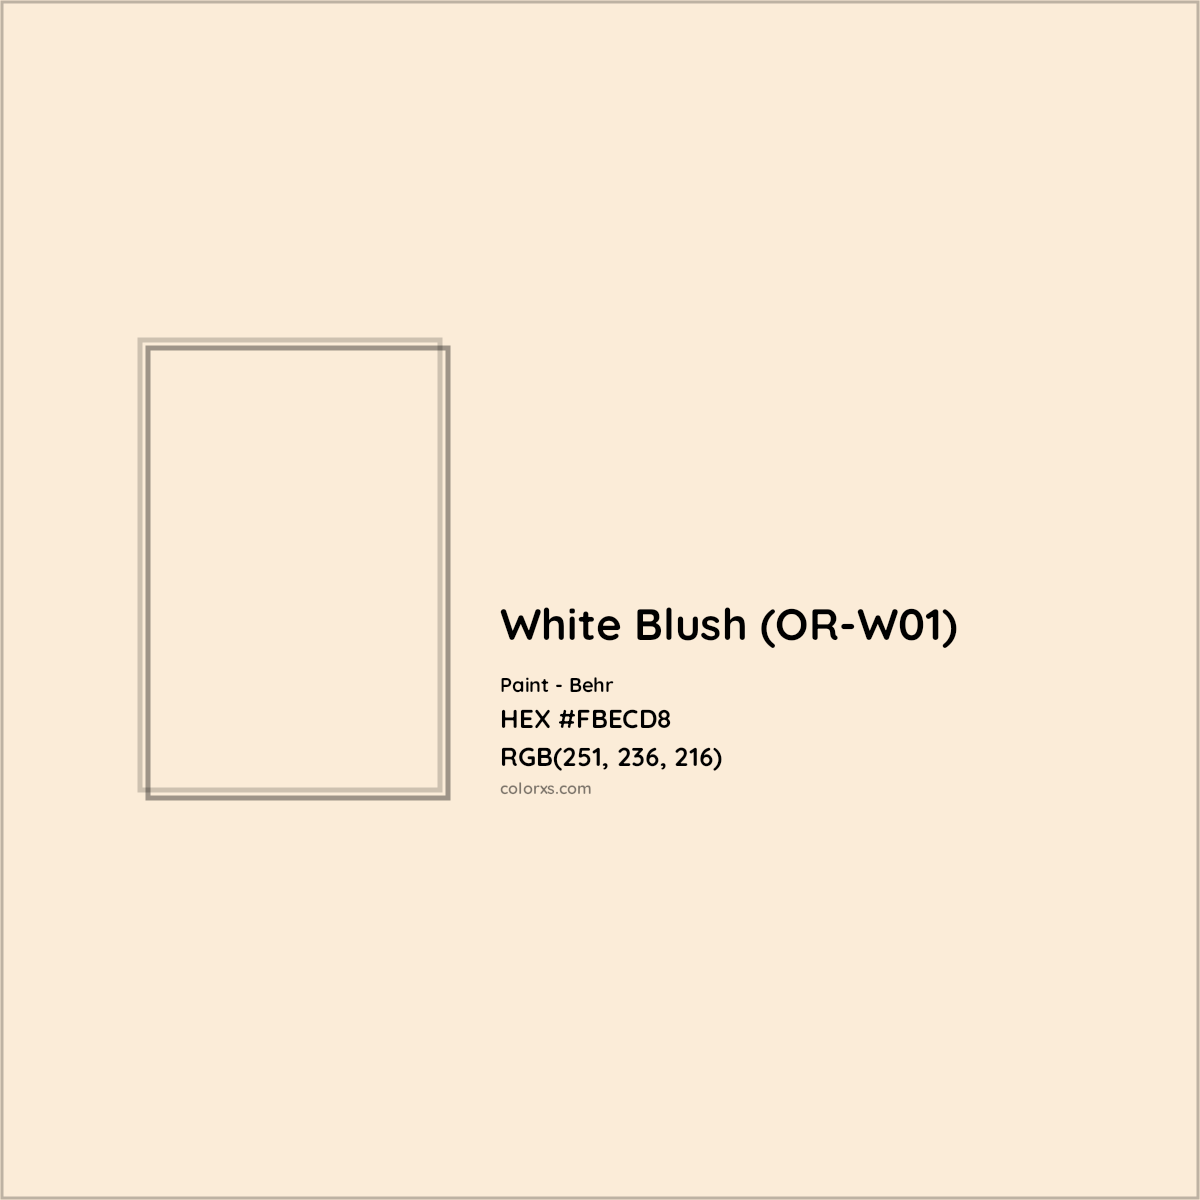 HEX #FBECD8 White Blush (OR-W01) Paint Behr - Color Code